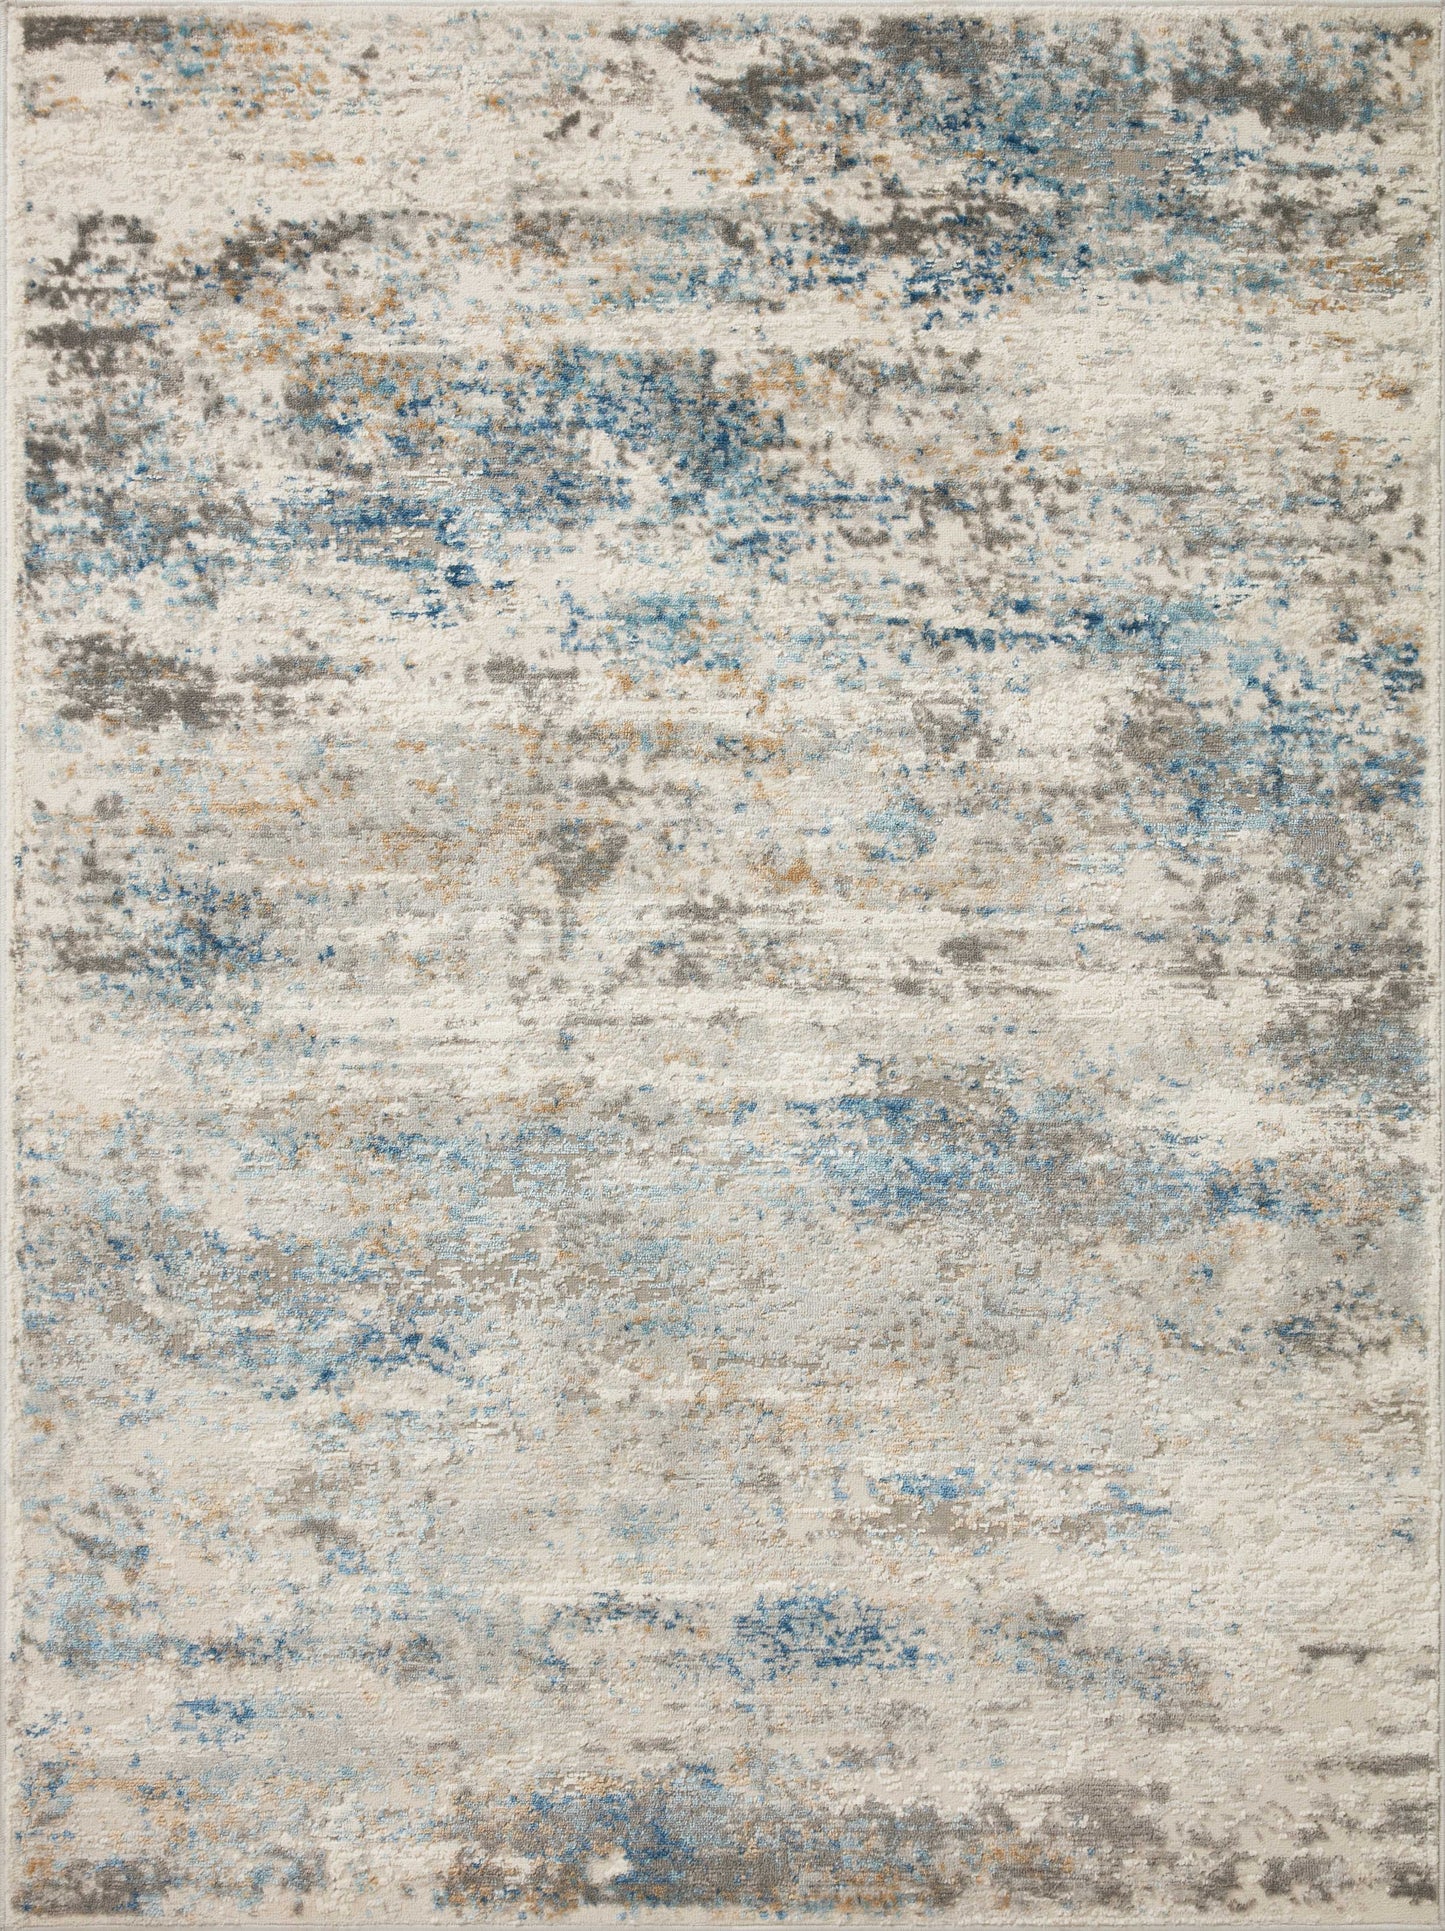 A picture of Loloi's Estelle rug, in style EST-03, color Ivory / Ocean